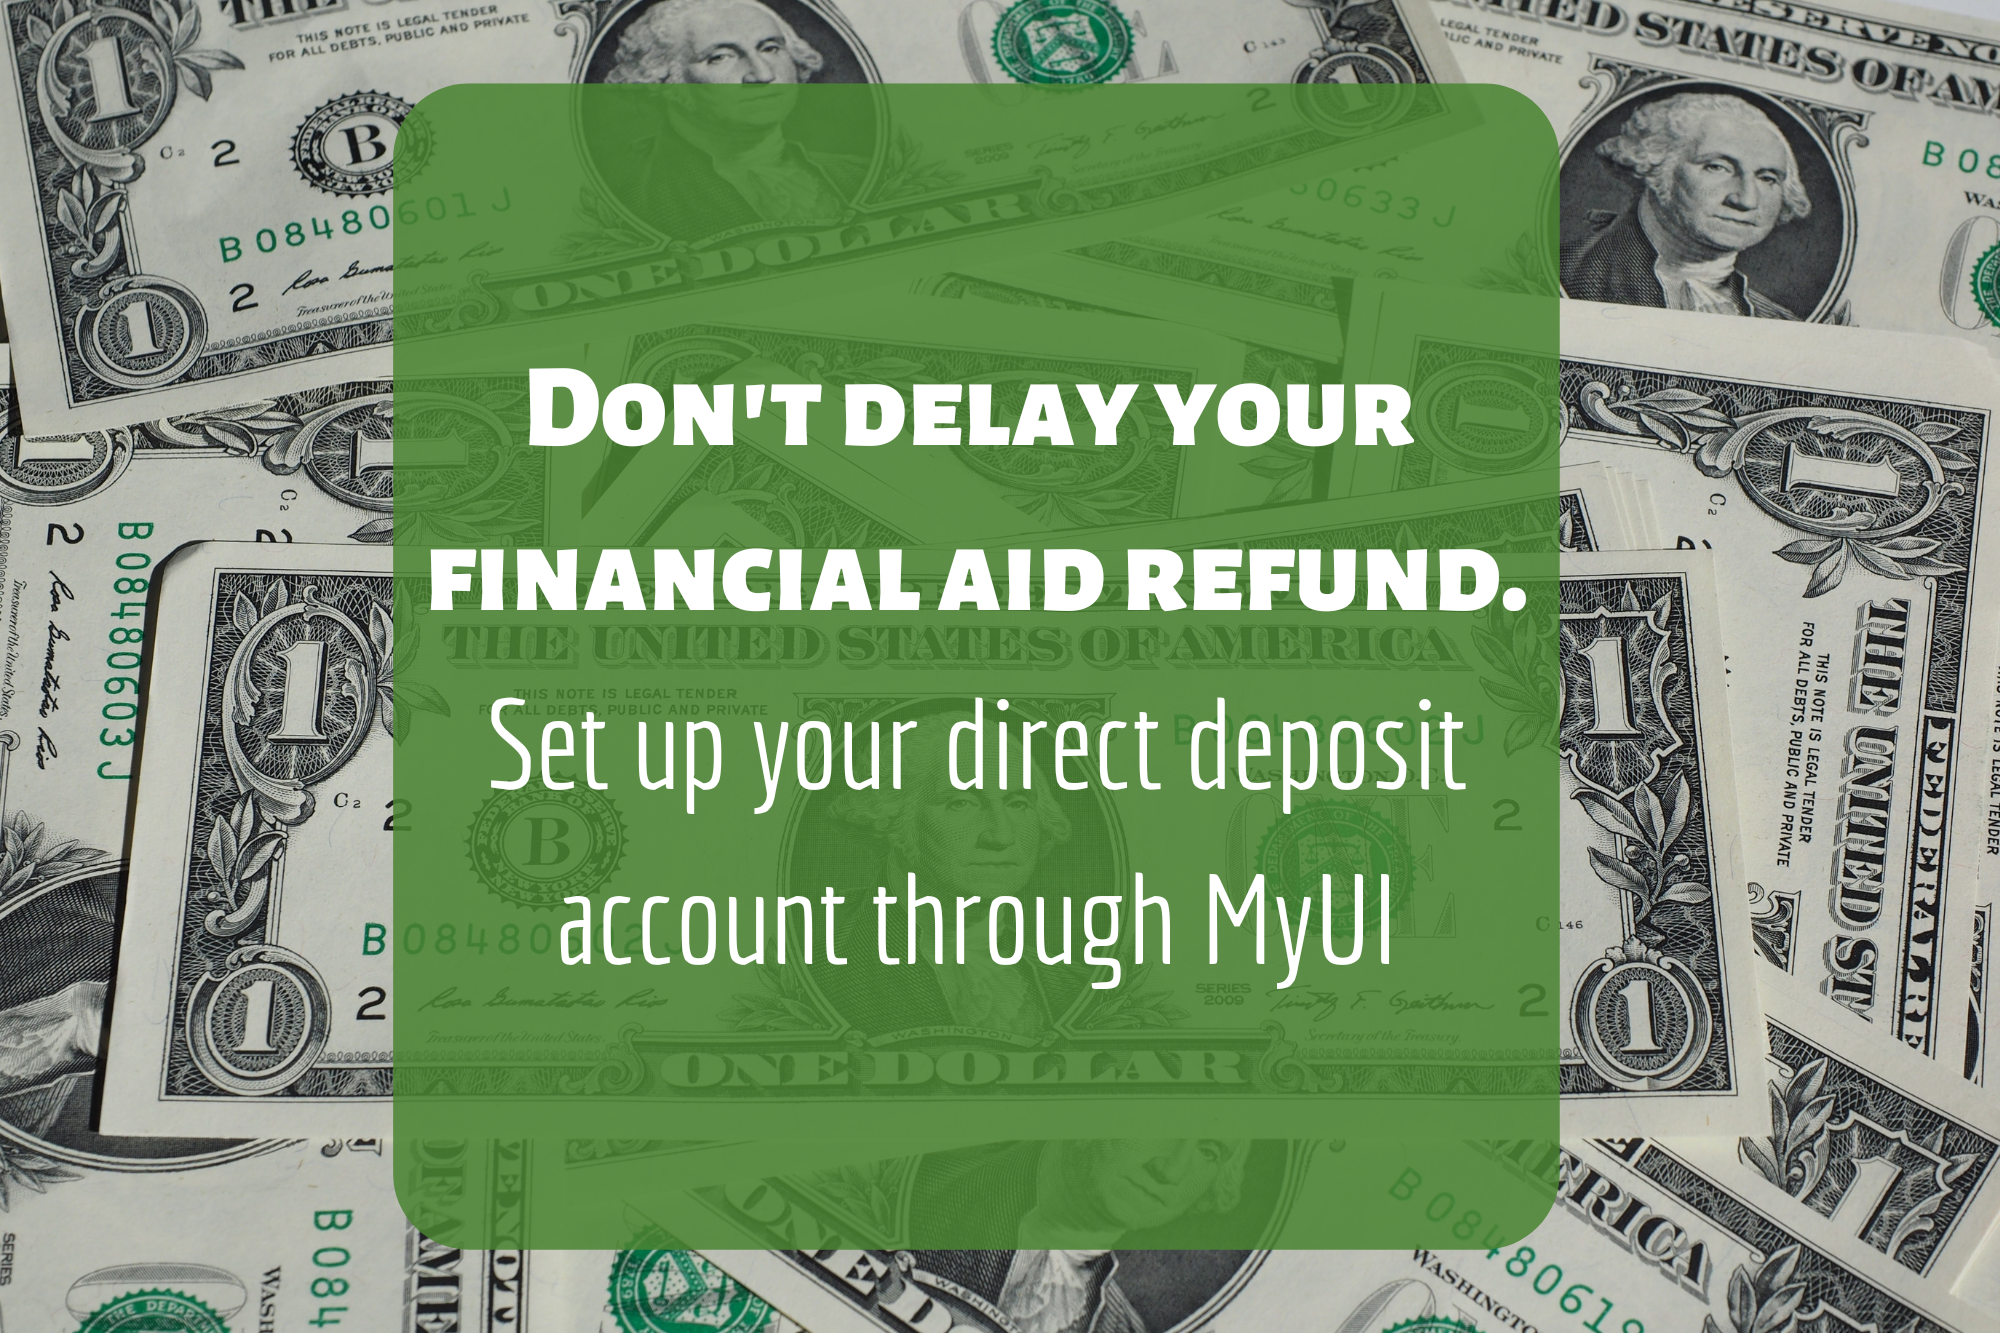 Don't Delay your refund